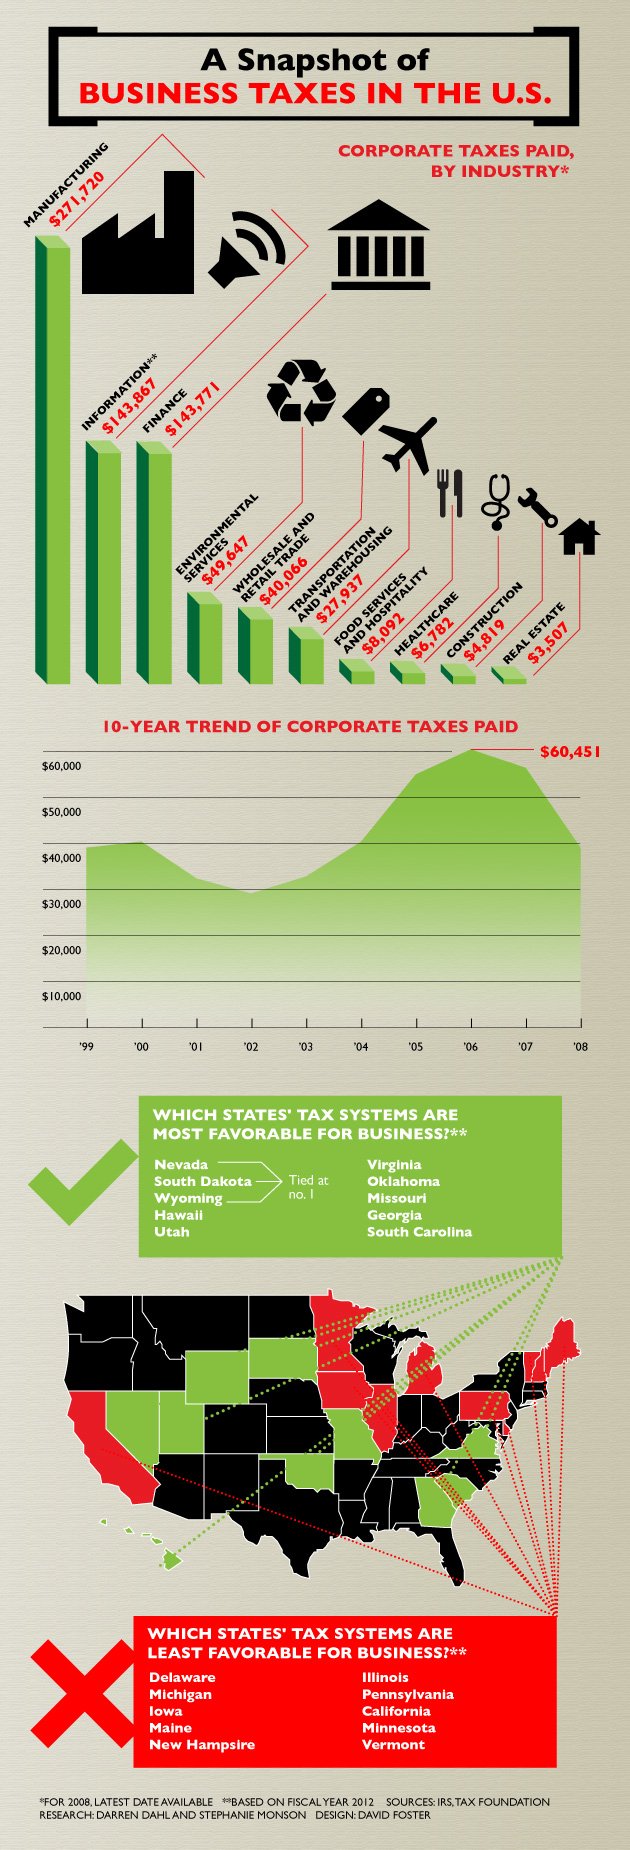 Infographic Business Taxes in the U.S.